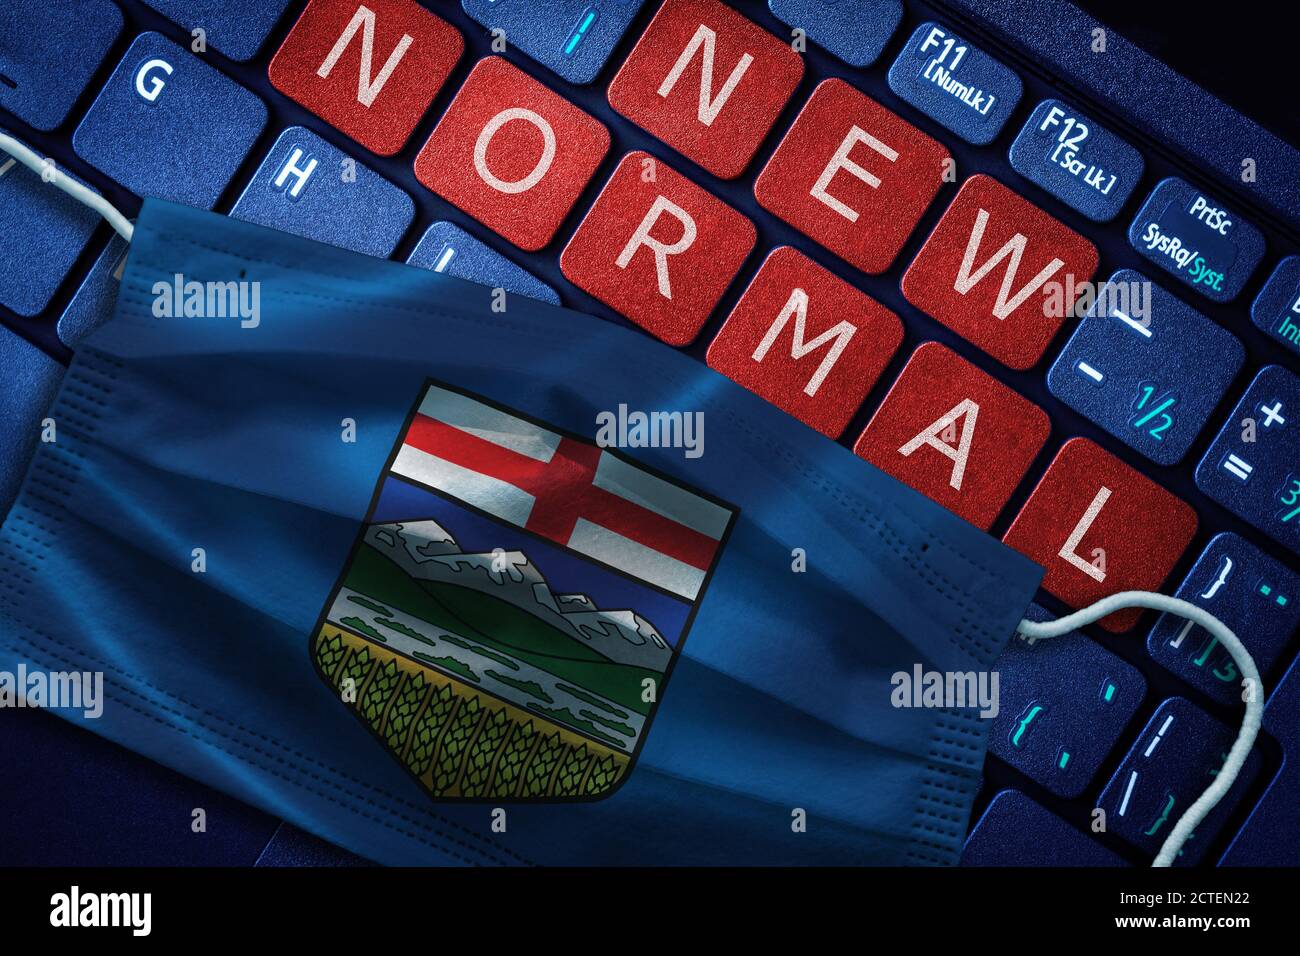 COVID-19 coronavirus new normal concept in the Canadian province of Alberta as shown by Alberta flag on face mask with New Normal on laptop red alert Stock Photo